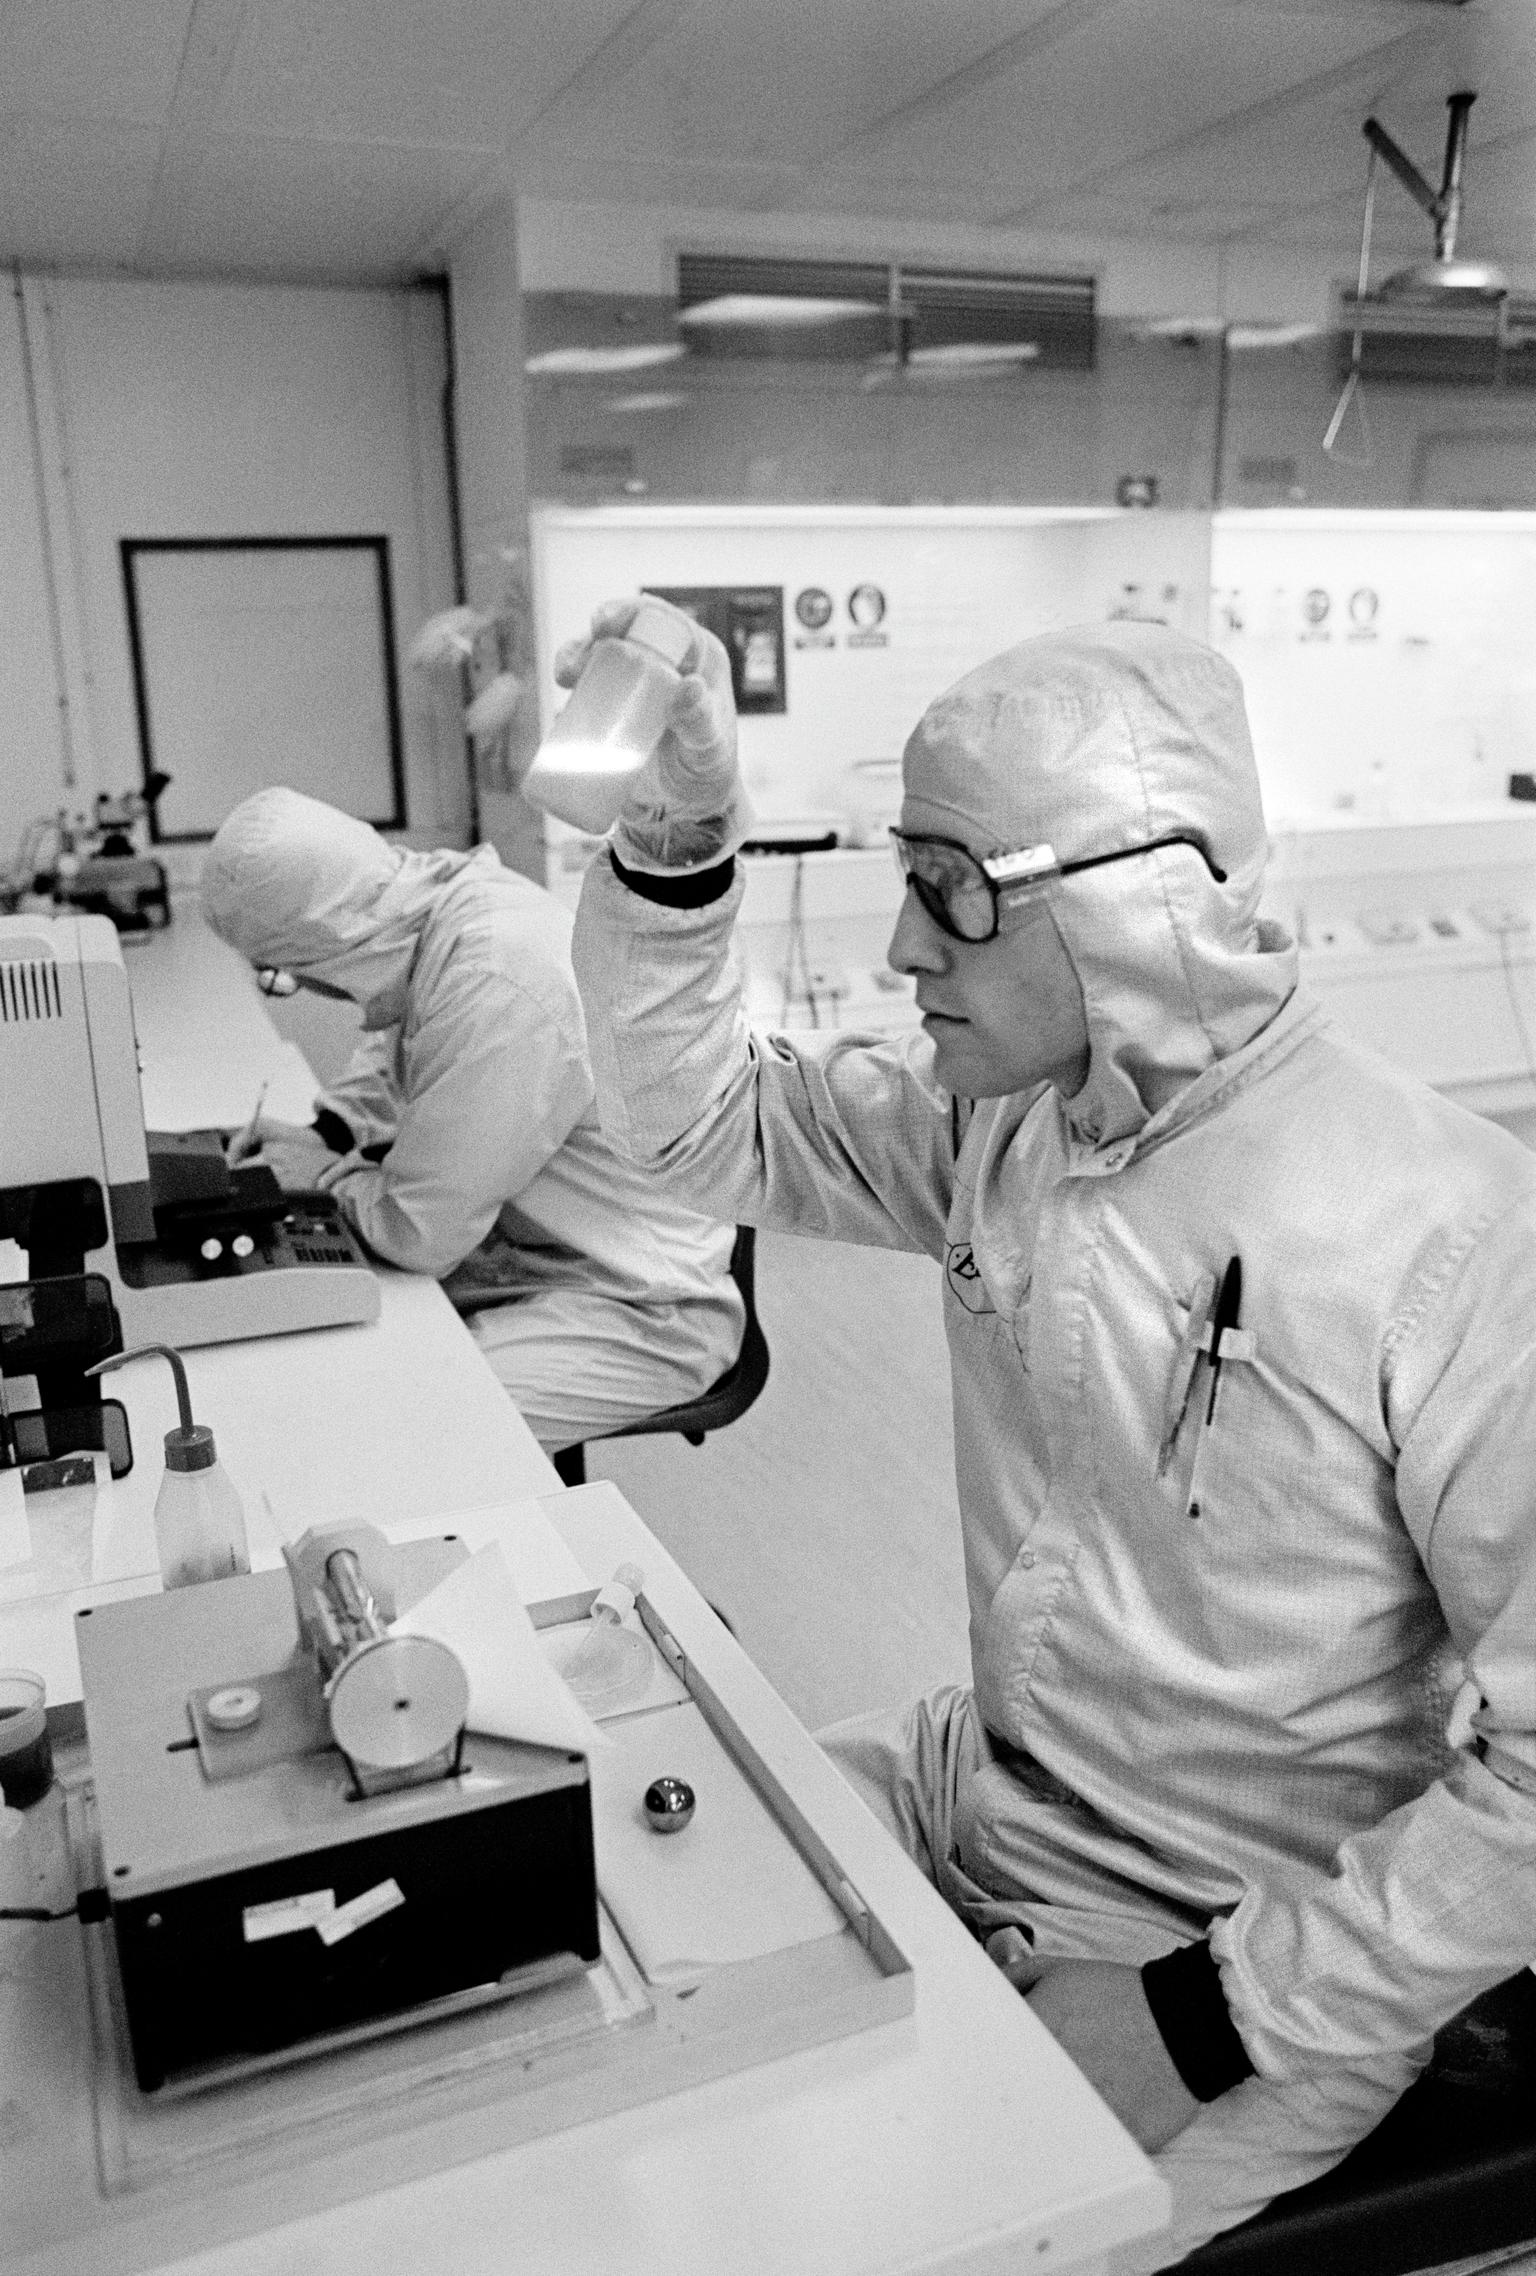 Epitaxial Products the world’s largest independent wafer manufacturer for the Compound Semiconductor industry. St Melons, Wales